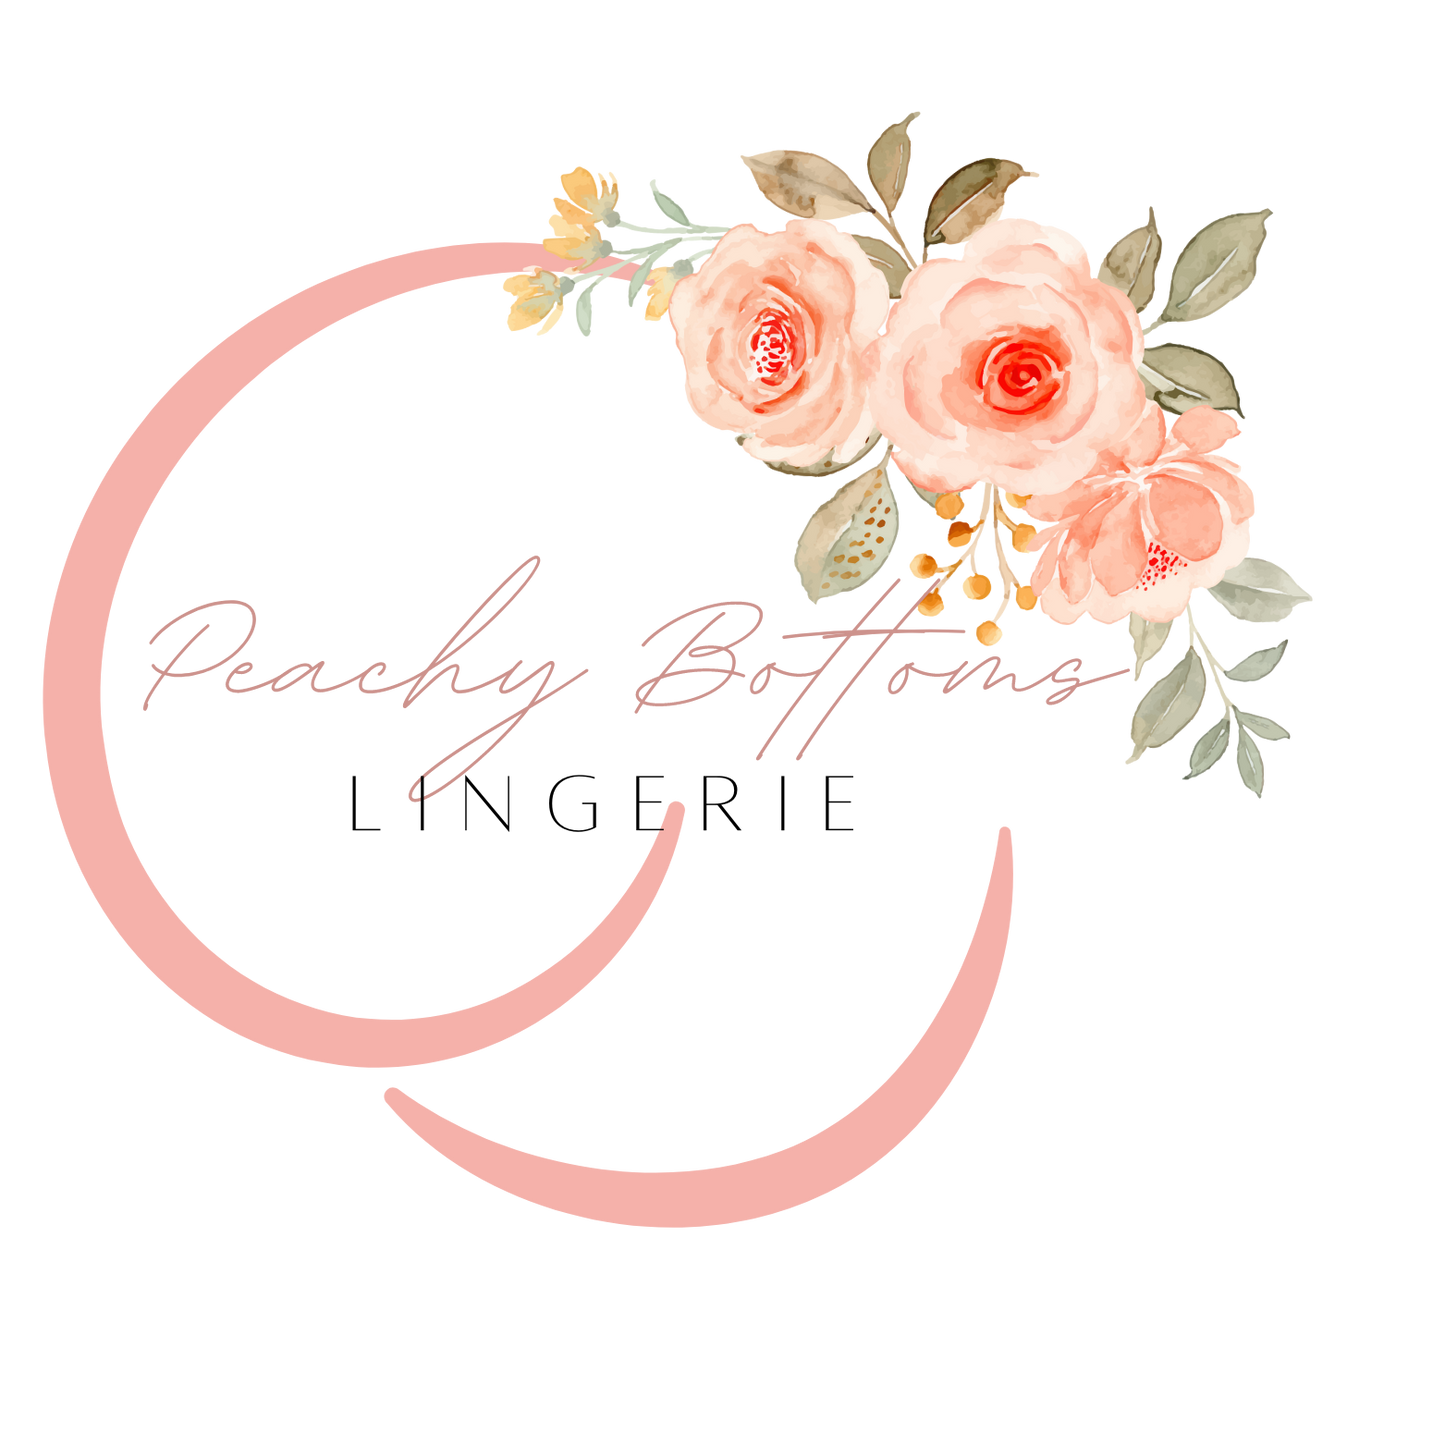 Peachy Bottoms Lingerie Gift Cards